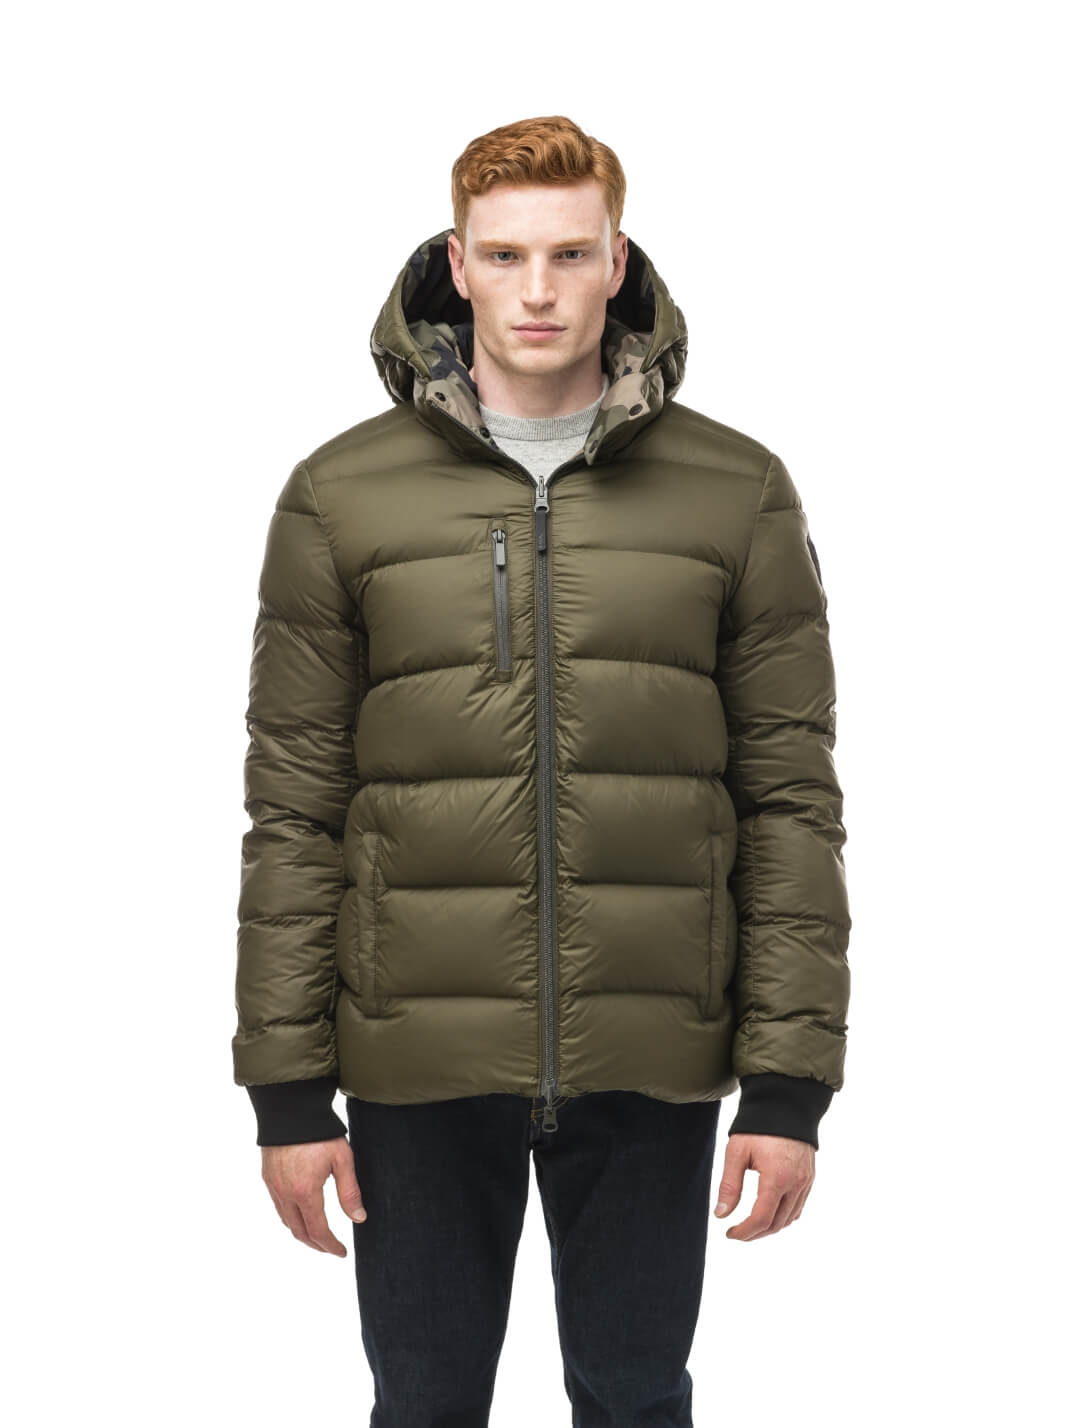 Hip length, reversible men's down filled jacket with removable hood in Camo